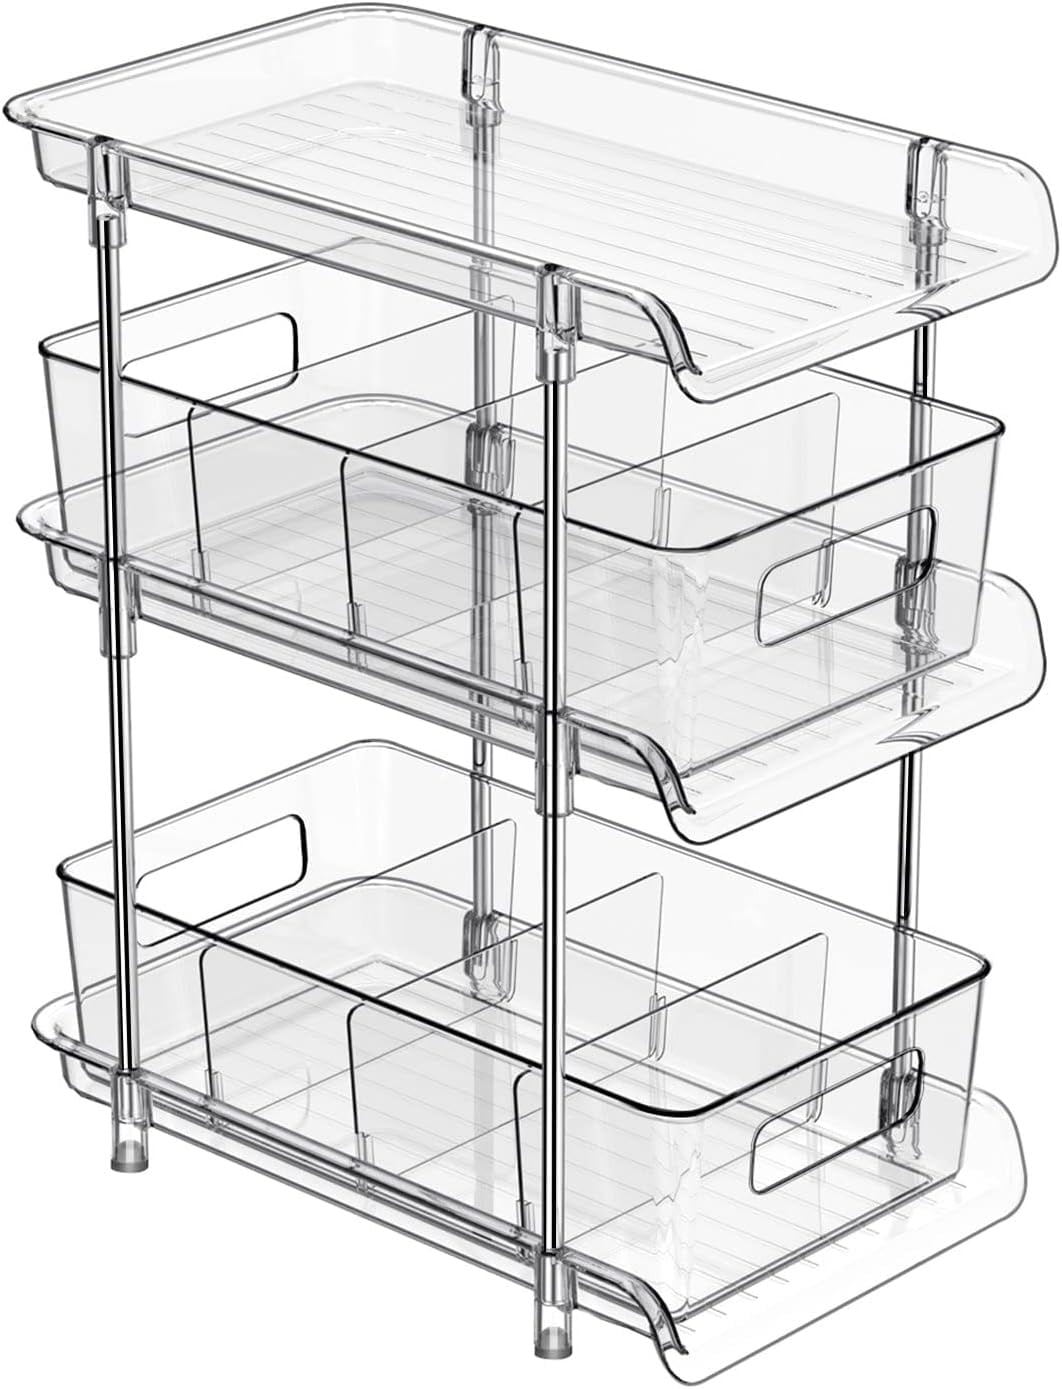 Sunyok 2 Tier Clear Organizer with Dividers, Multi-Purpose Slide-Out Storage Container, for Bathroom Kitchen Pantry Storage, Medicine Cabinet